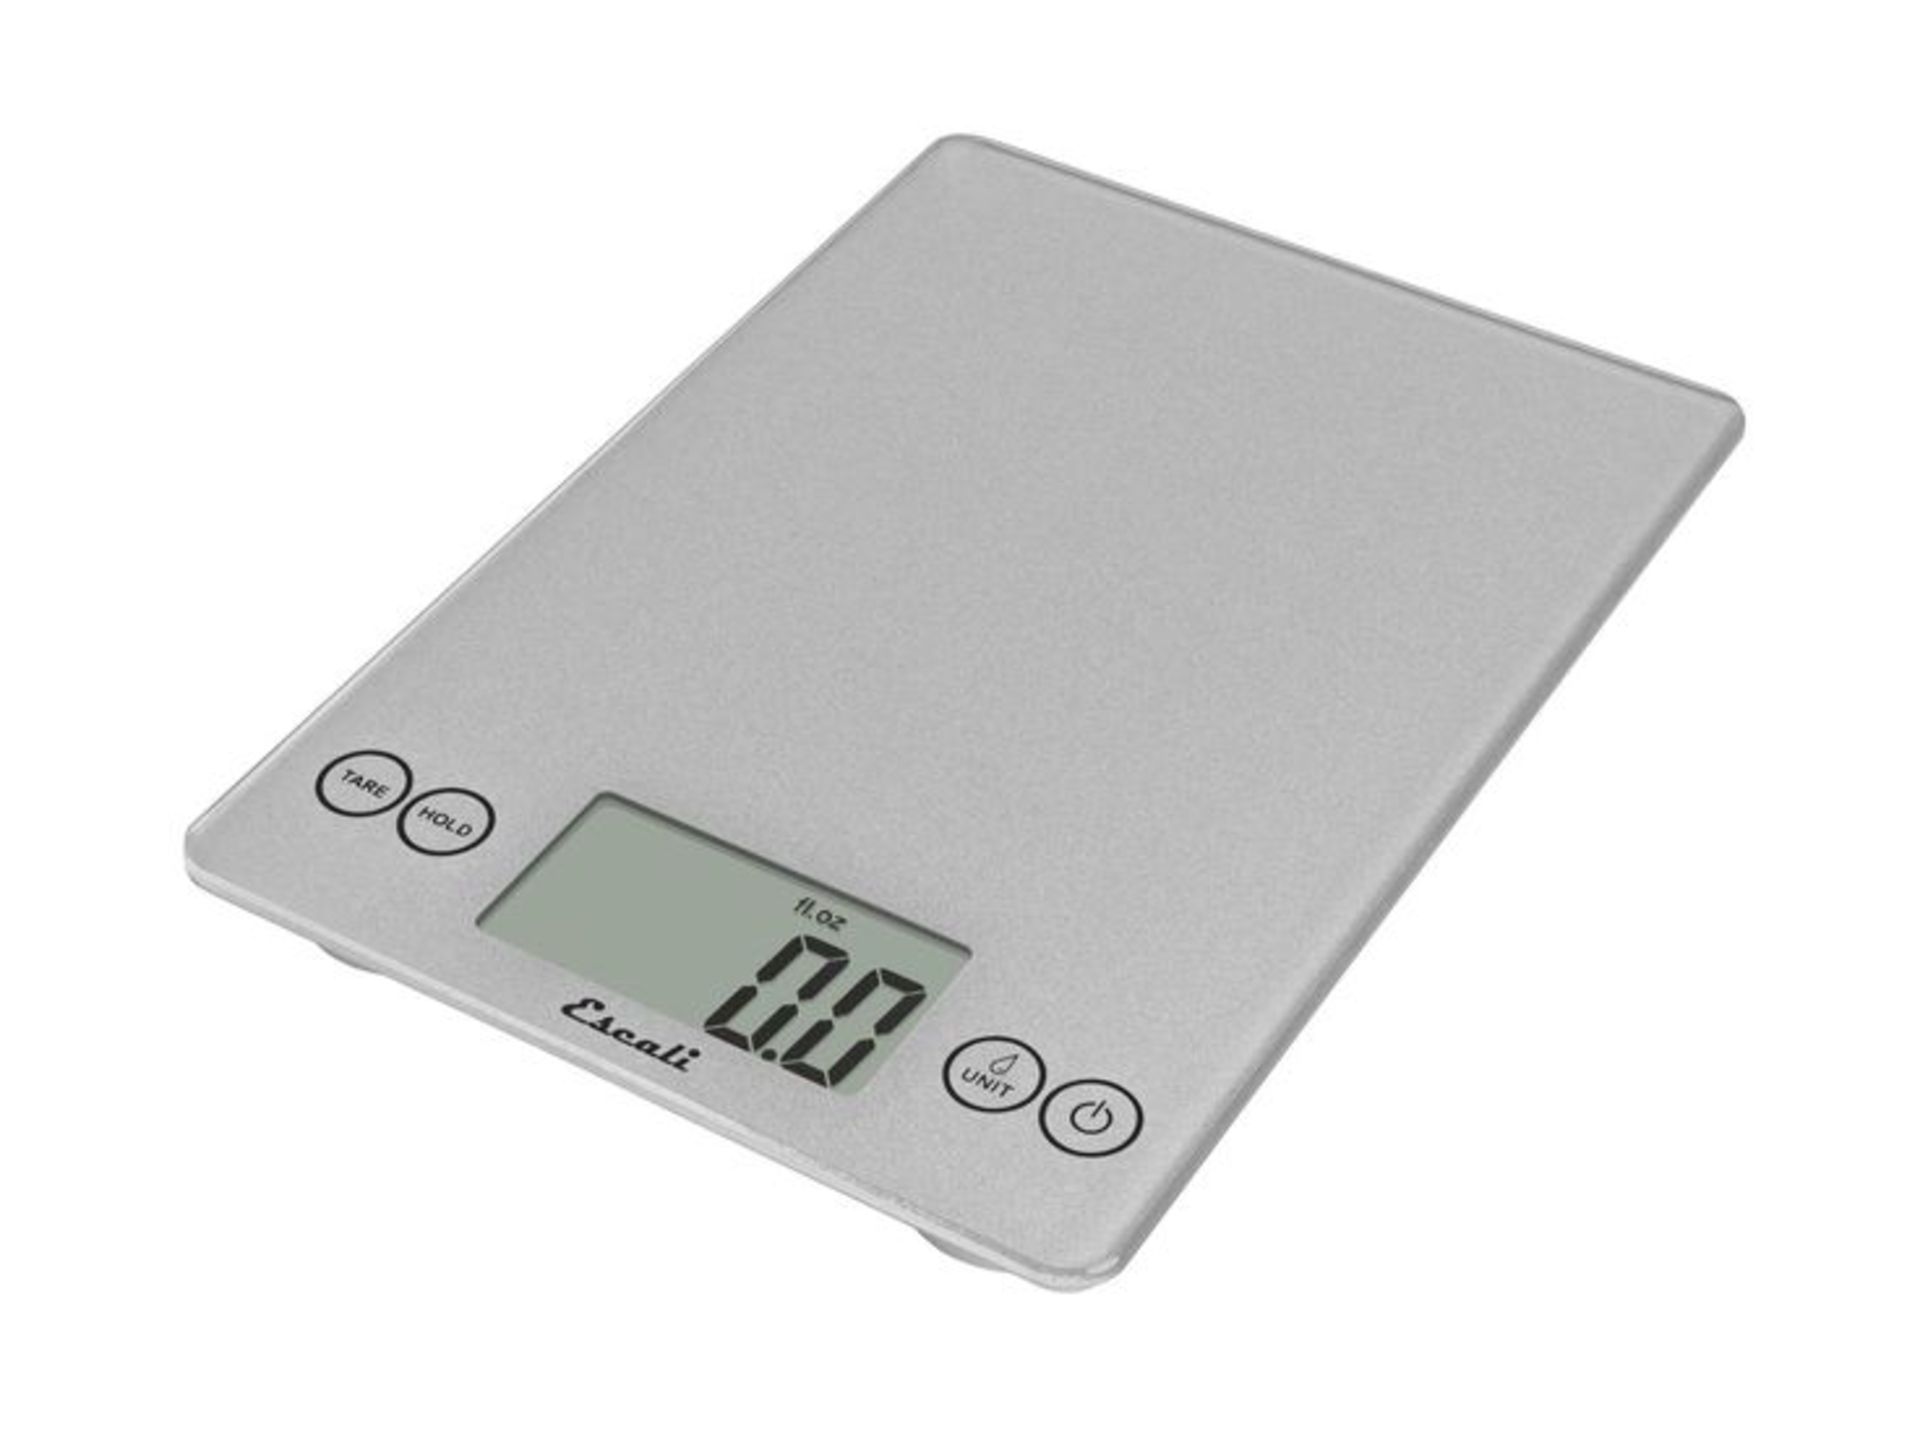 V *TRADE QTY* Brand New Digital Kitchen Scales with Large LCD Display in lbs OZs and Grams (Styles - Image 3 of 4